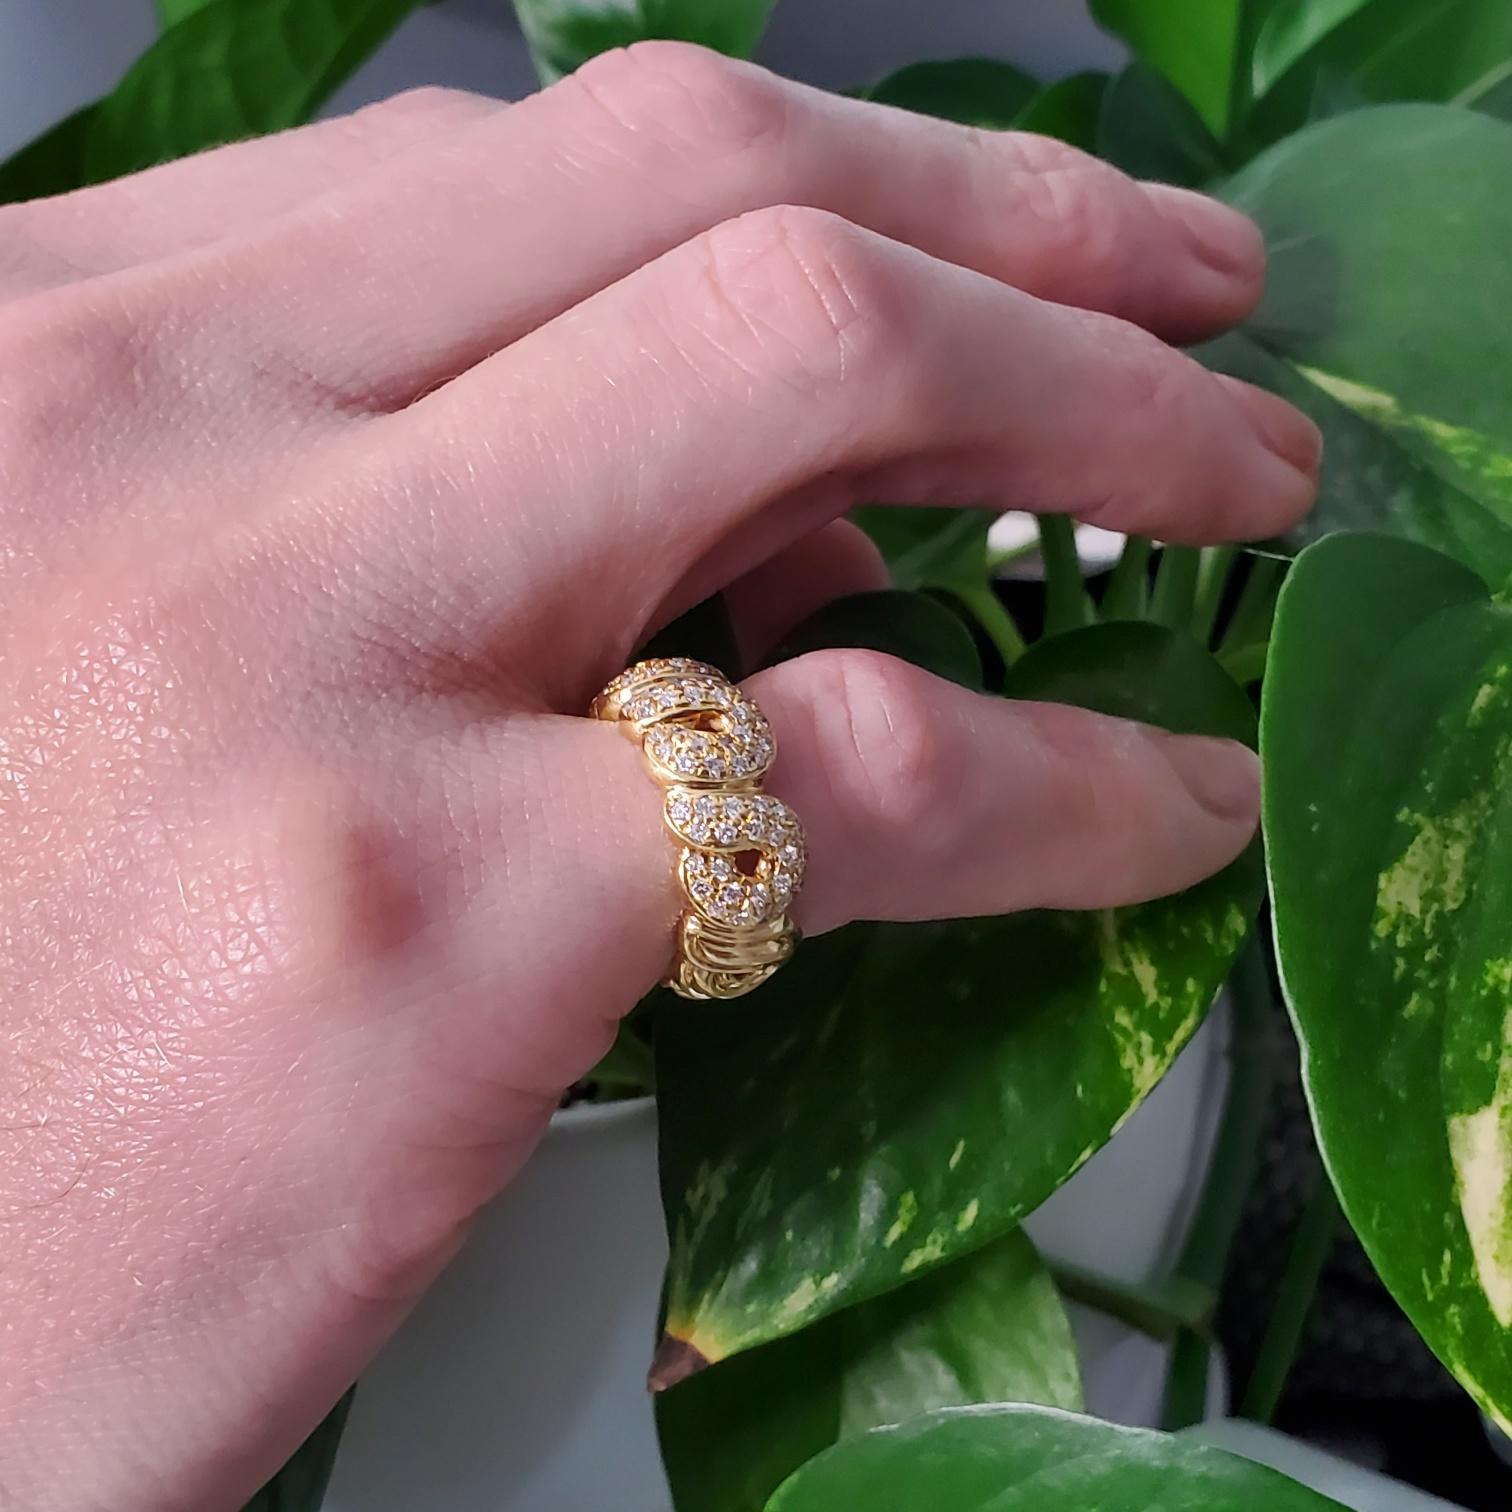 Jeweled eternity band ring designed by Boucheron.

Beautiful and elegant half-eternity, created in Paris, France by the house of Boucheron. It was crafted, with a nice wavy pattern in solid yellow gold of 18 karat with high polished